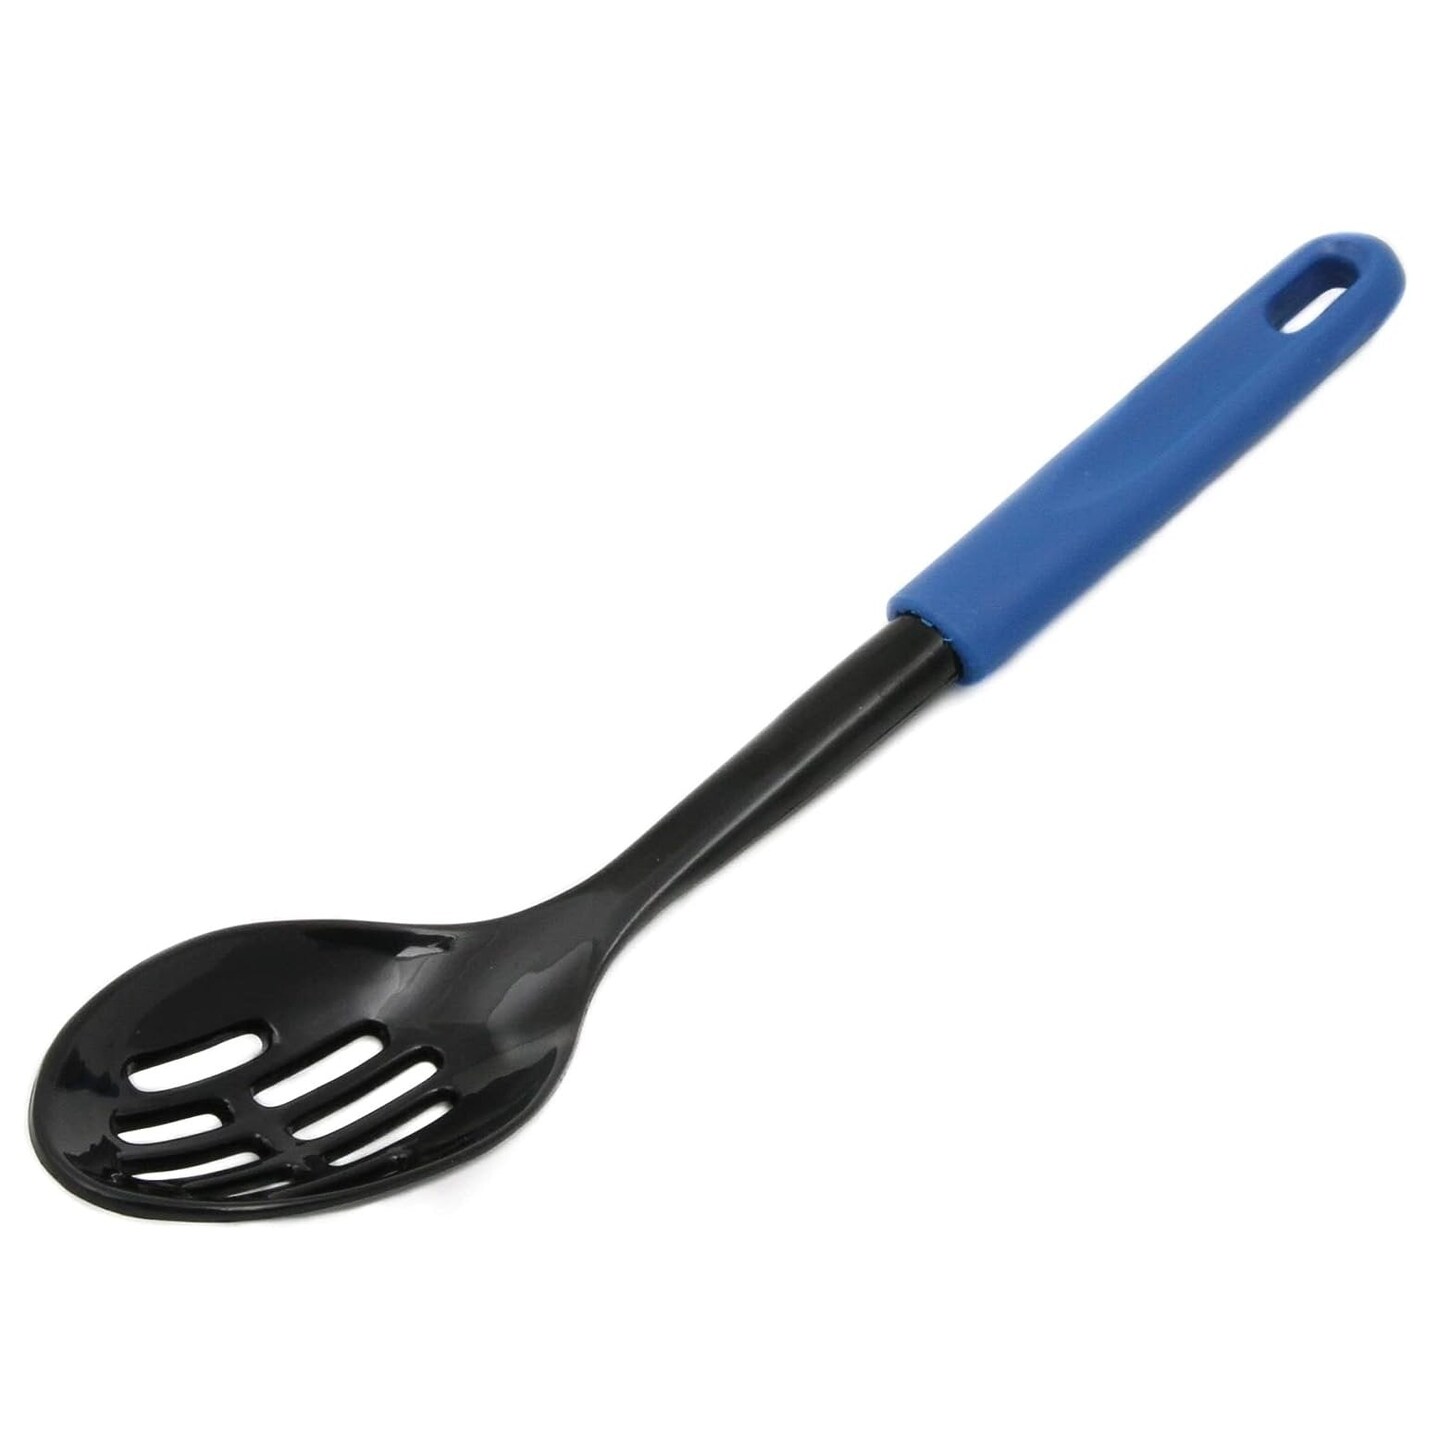 Chef Craft 11.5" Basic Heat Resistant Nylon Slotted Serving Spoon